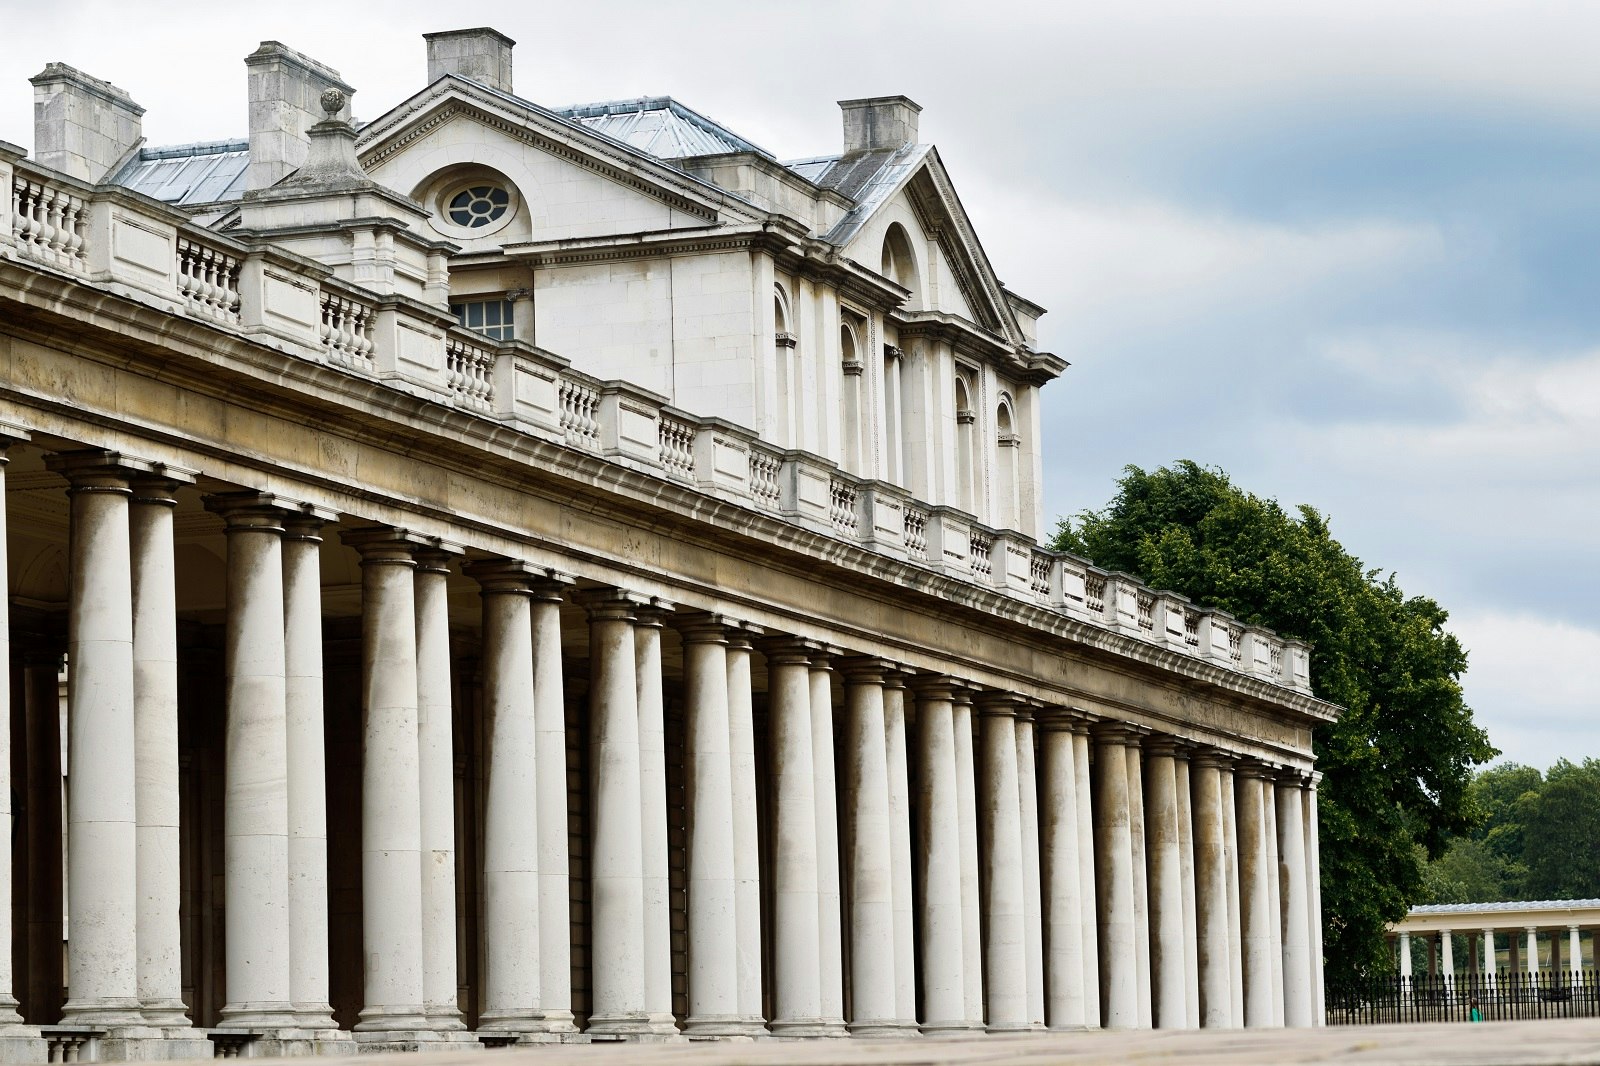 Outdoor Wedding Venues in London - Old Royal Naval College